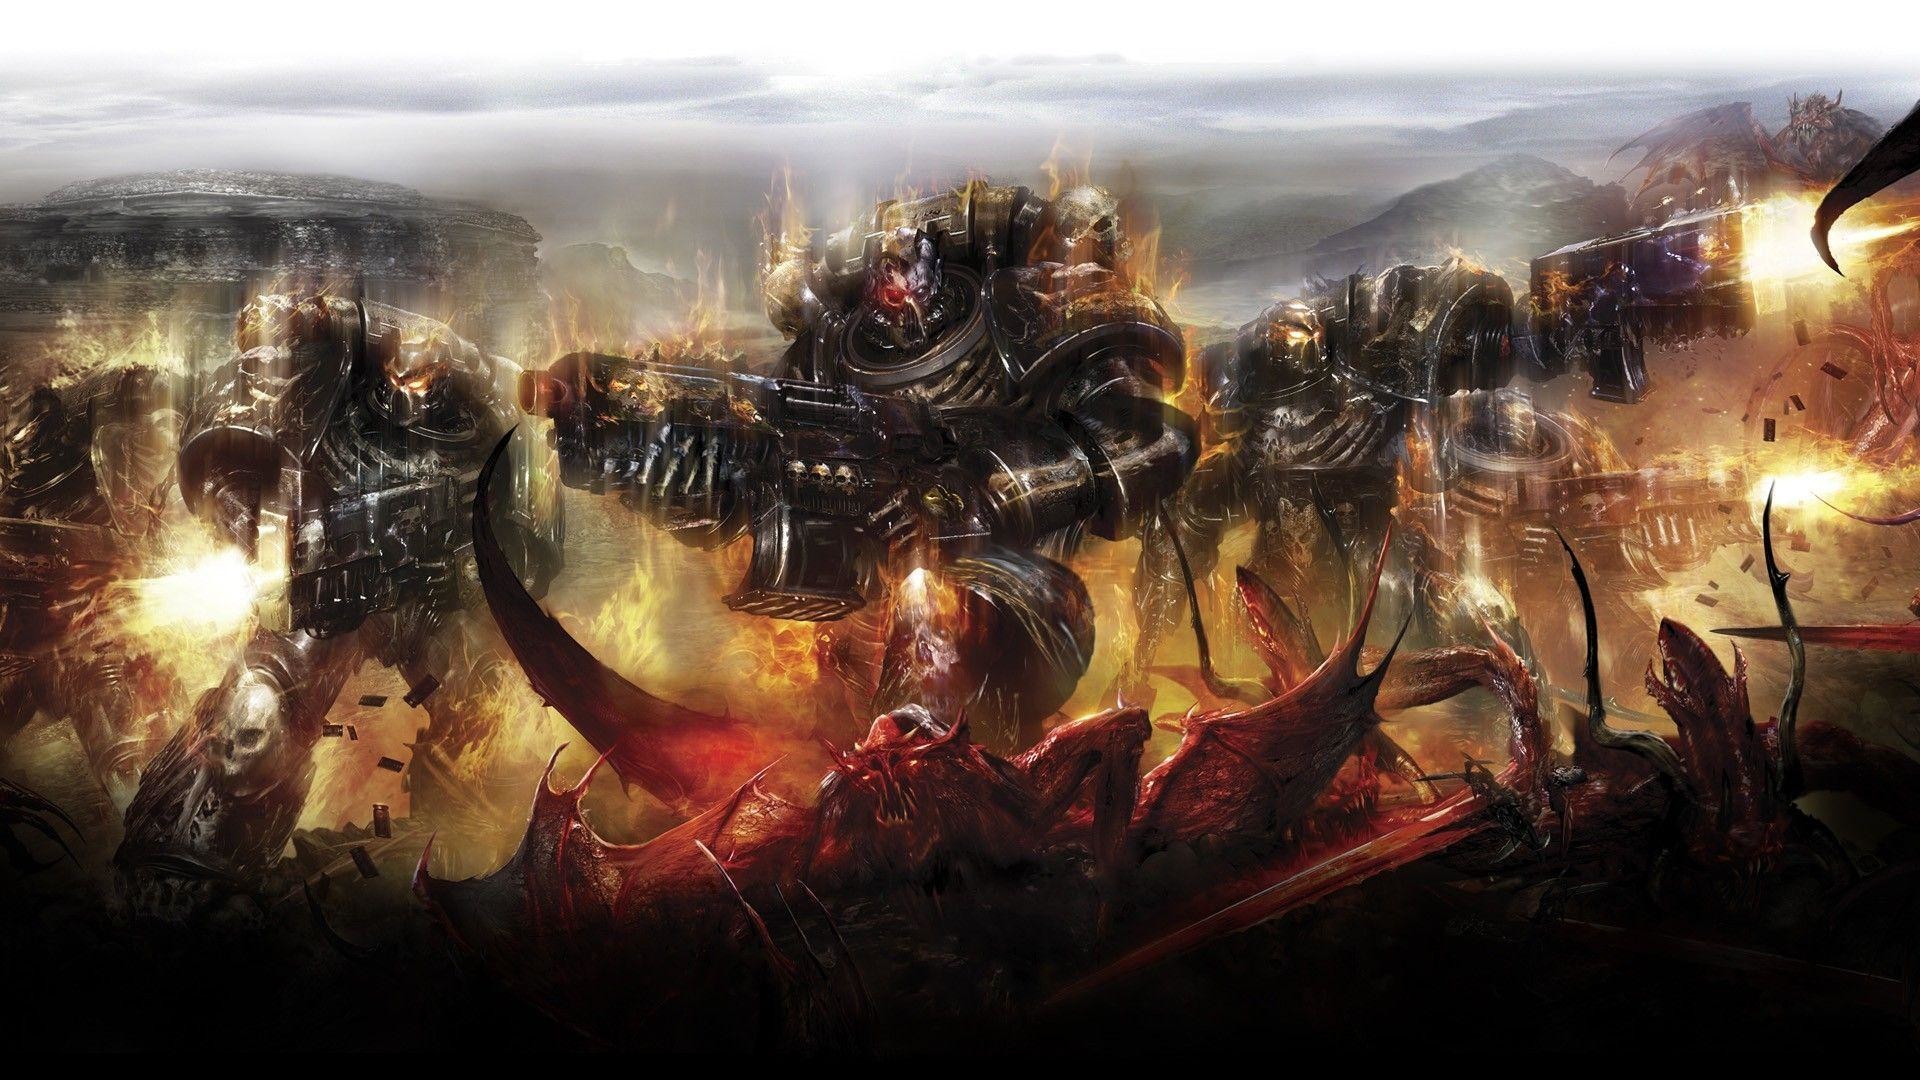 1920x1080 Wallpapers And Other Space Marine Related Art. | Warhammer 40,000 .